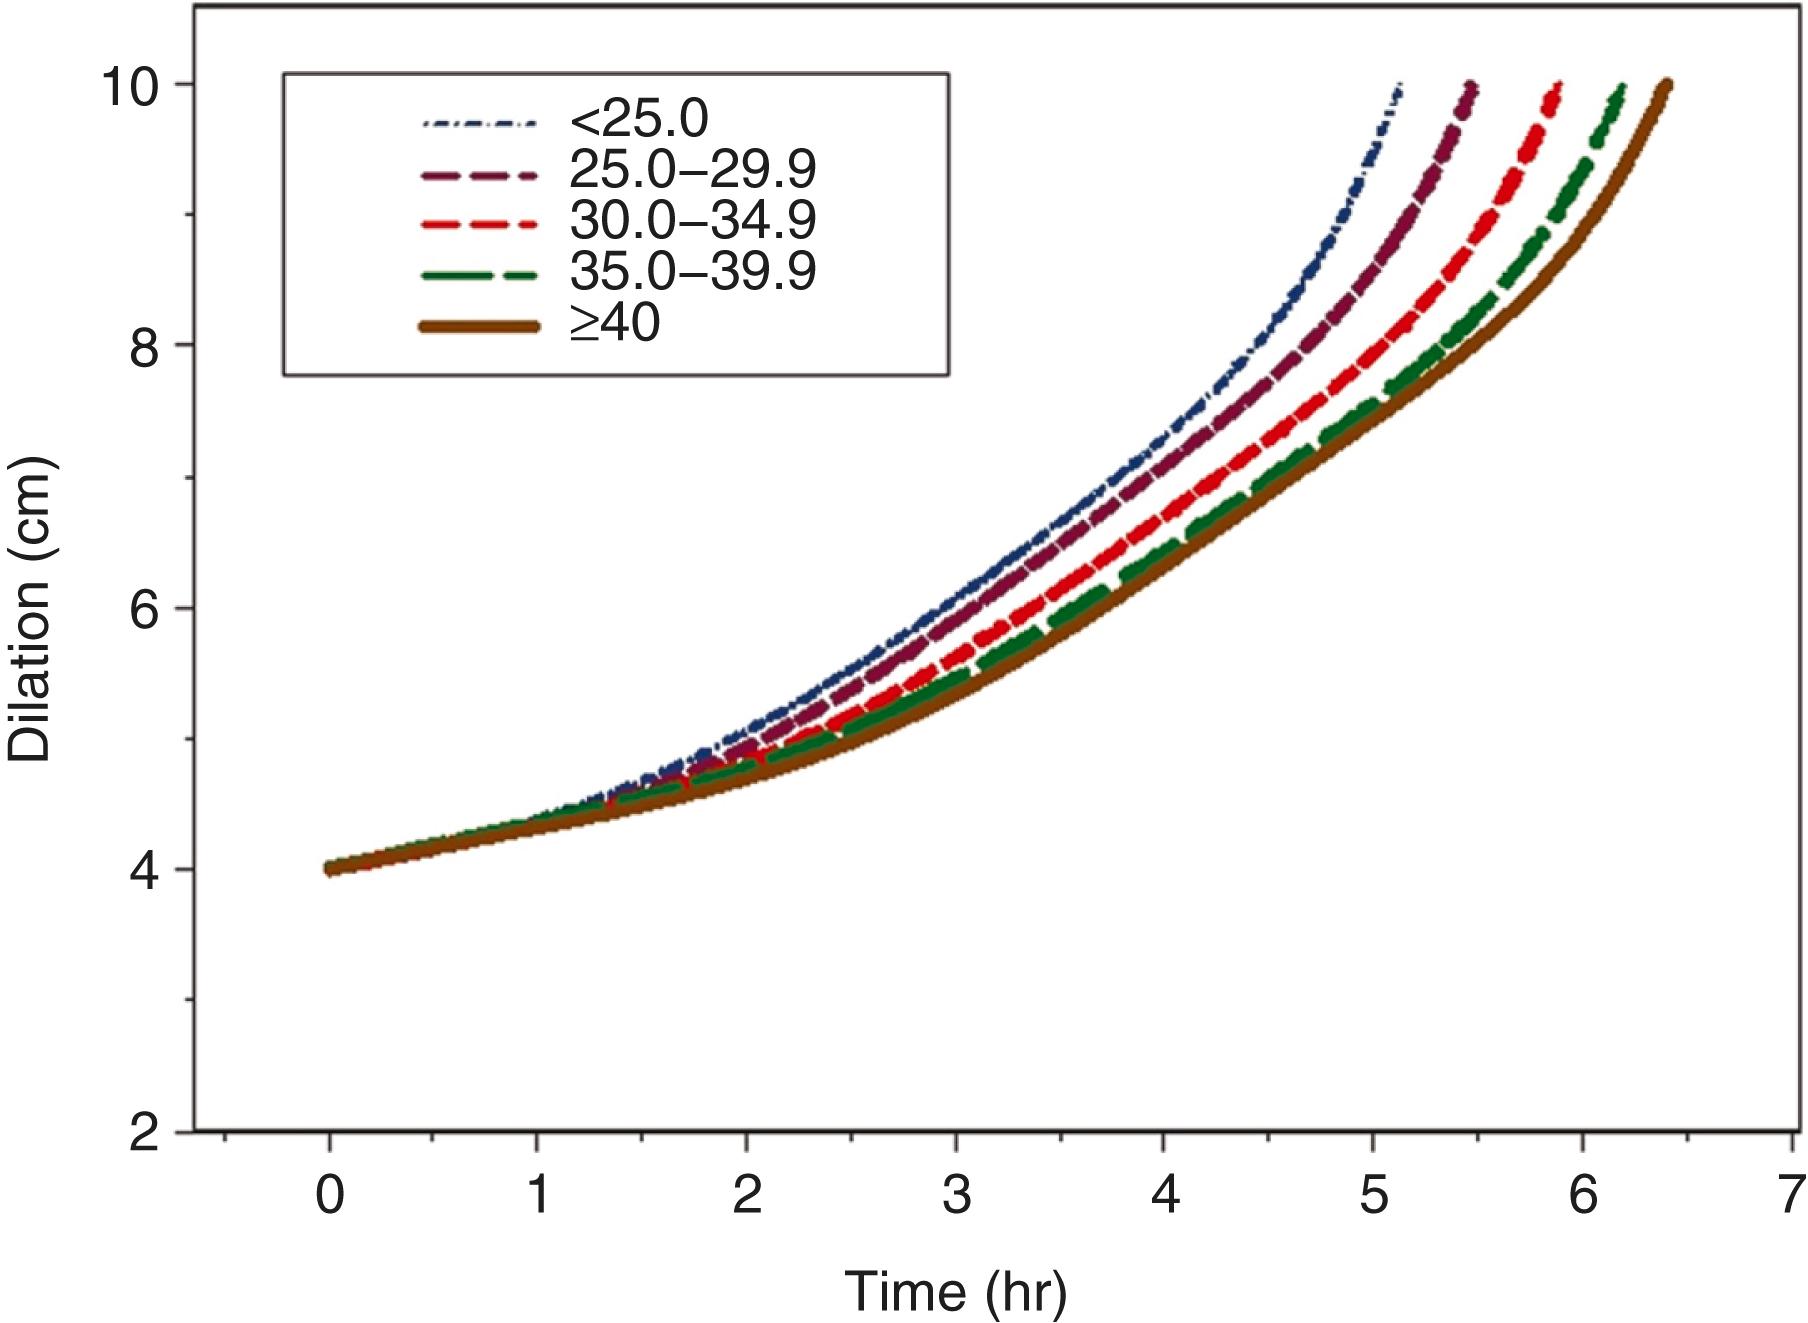 Figure 40.3, Predicted probability of cesarean delivery based on body mass index (BMI) as a continuum stratified by parity and prior cesarean status.